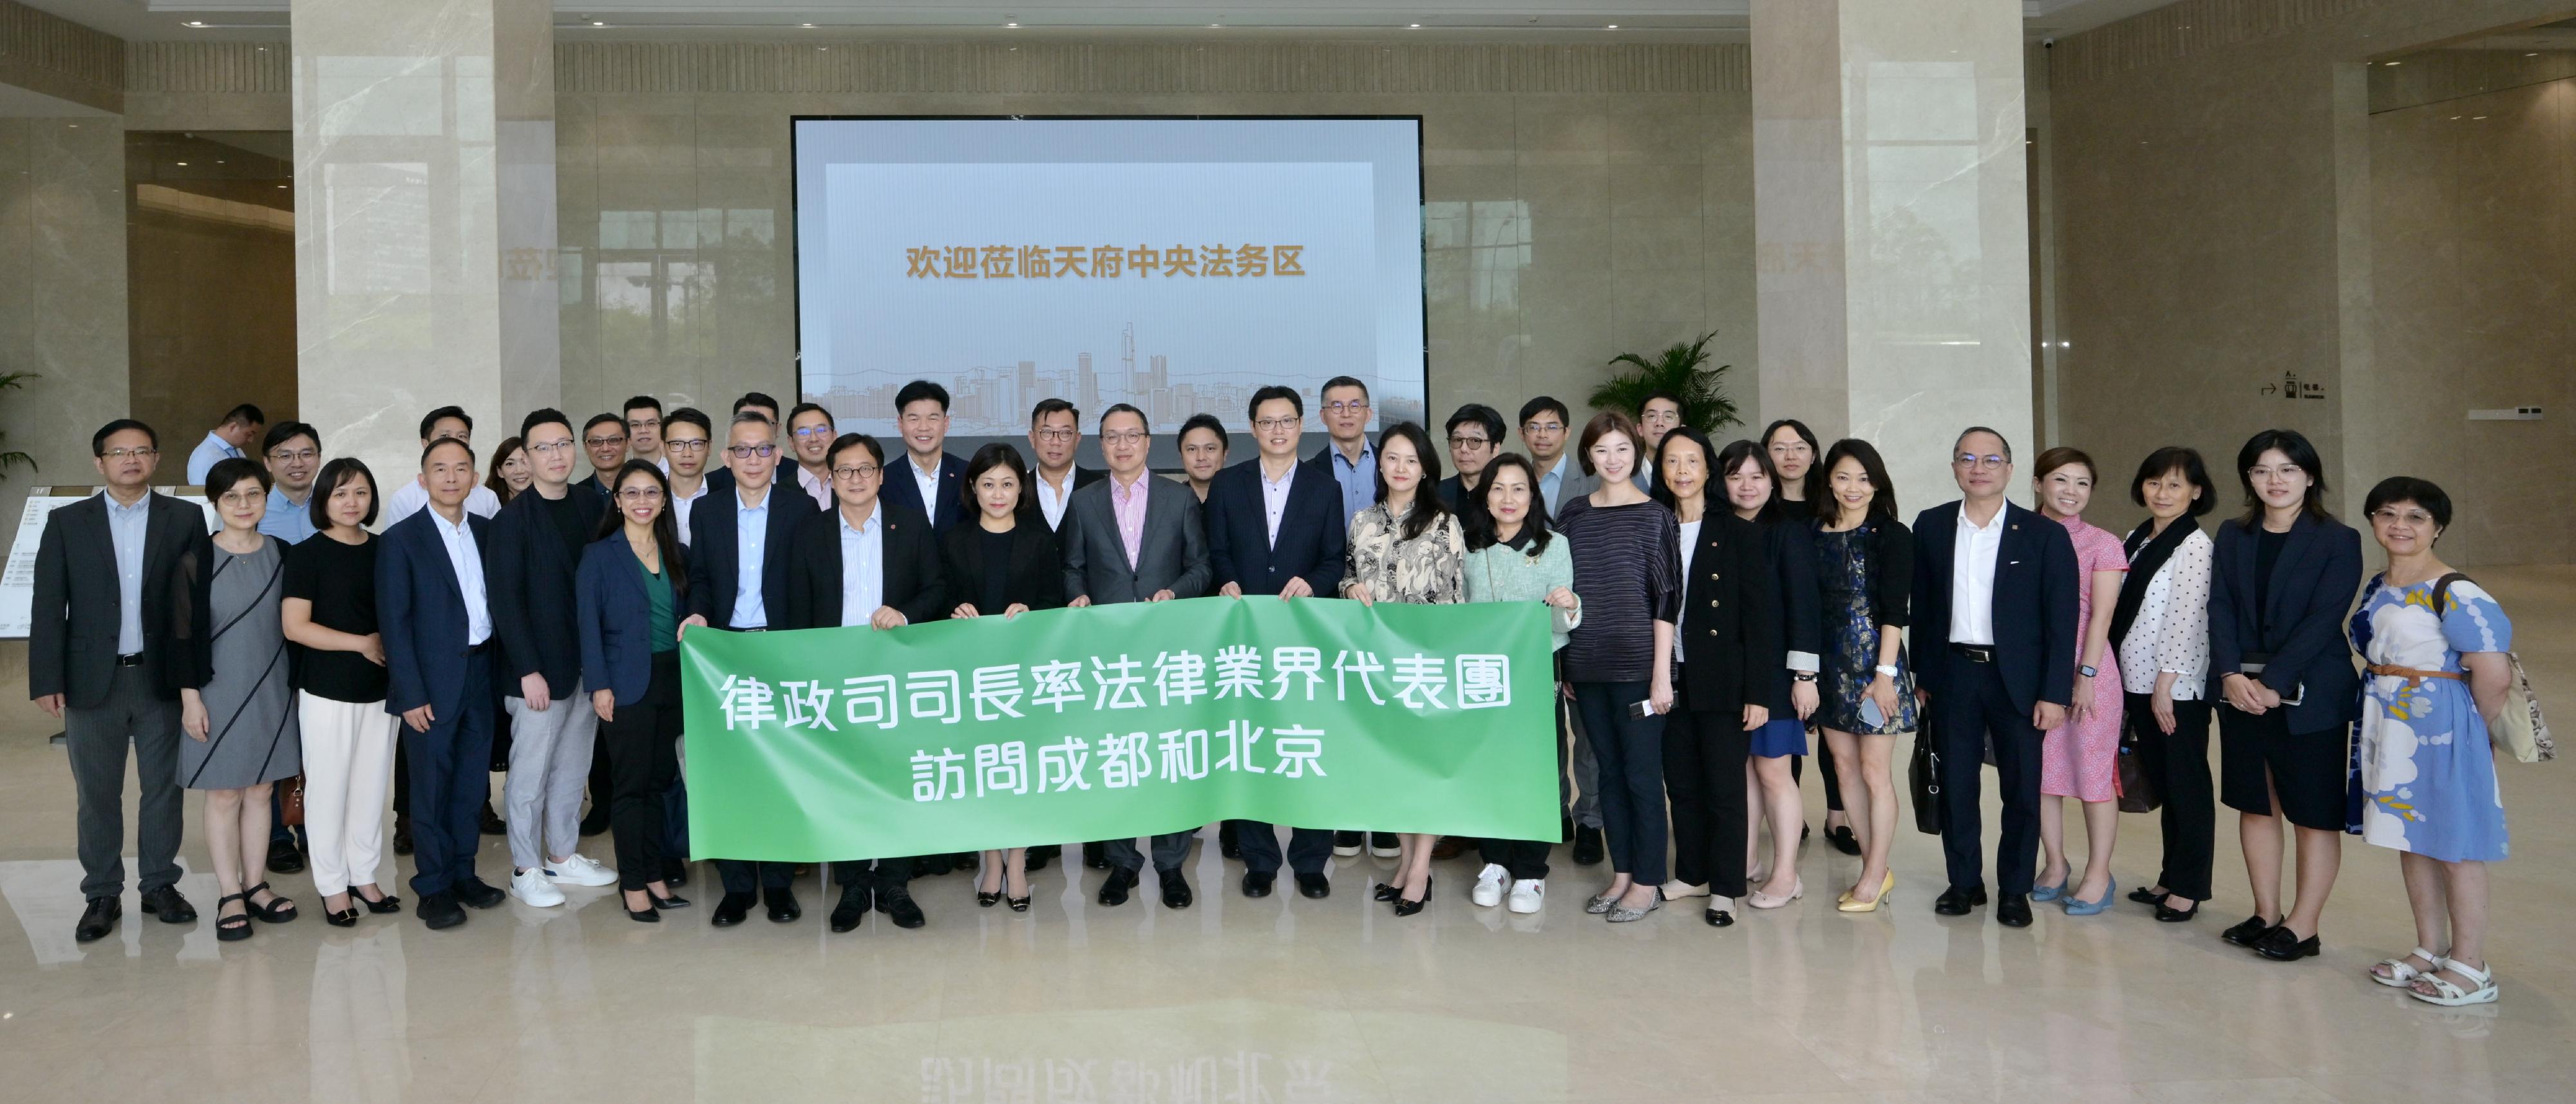 The Secretary for Justice, Mr Paul Lam, SC, led a delegation from Hong Kong's legal and dispute resolution sector, comprising more than 100 representatives from the Hong Kong Bar Association, the Law Society of Hong Kong and enterprises as well as other representatives, on a visit to Chengdu today (August 23). Photo shows Mr Lam (front row, 10th left) and members of the delegation at Tianfu Central Legal Services District.
